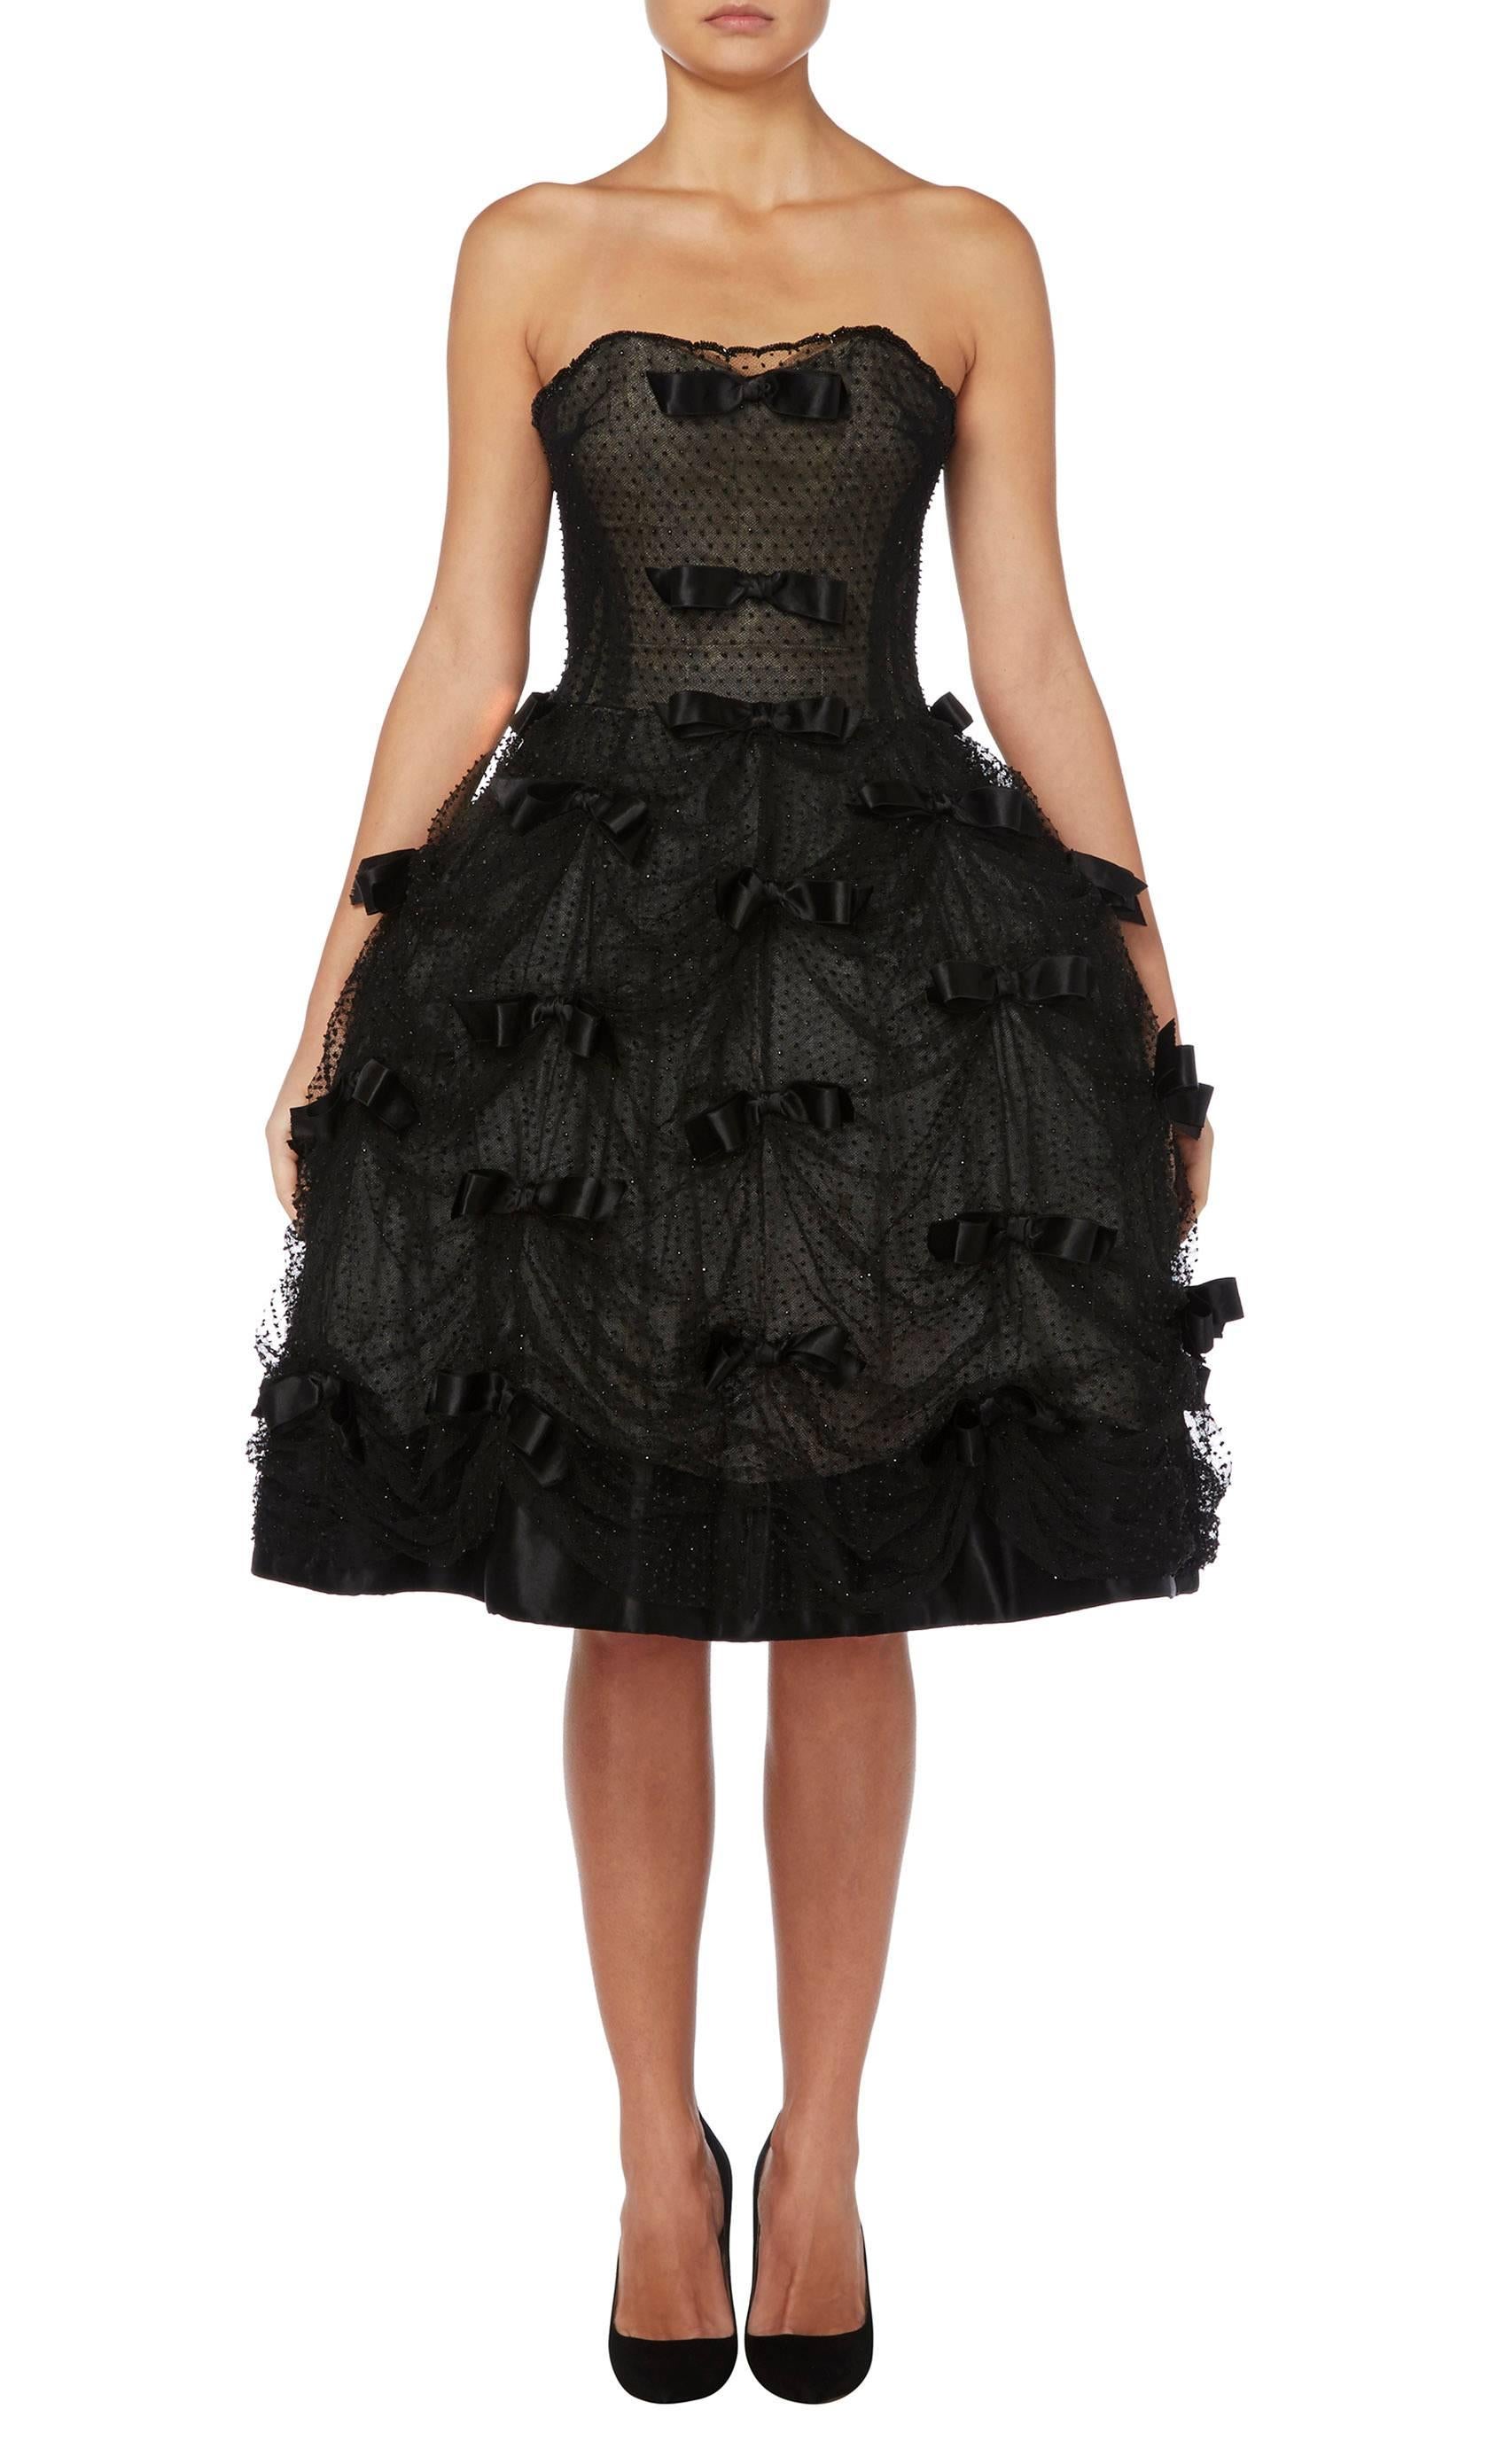 Constructed in black silk and ivory tulle
Featuring black glass bugle bead and silk satin bow embellishment
Hook and eye fastenings to the side
Excellent condition with the original label, boning and underskirts
Professionally dry cleaned and